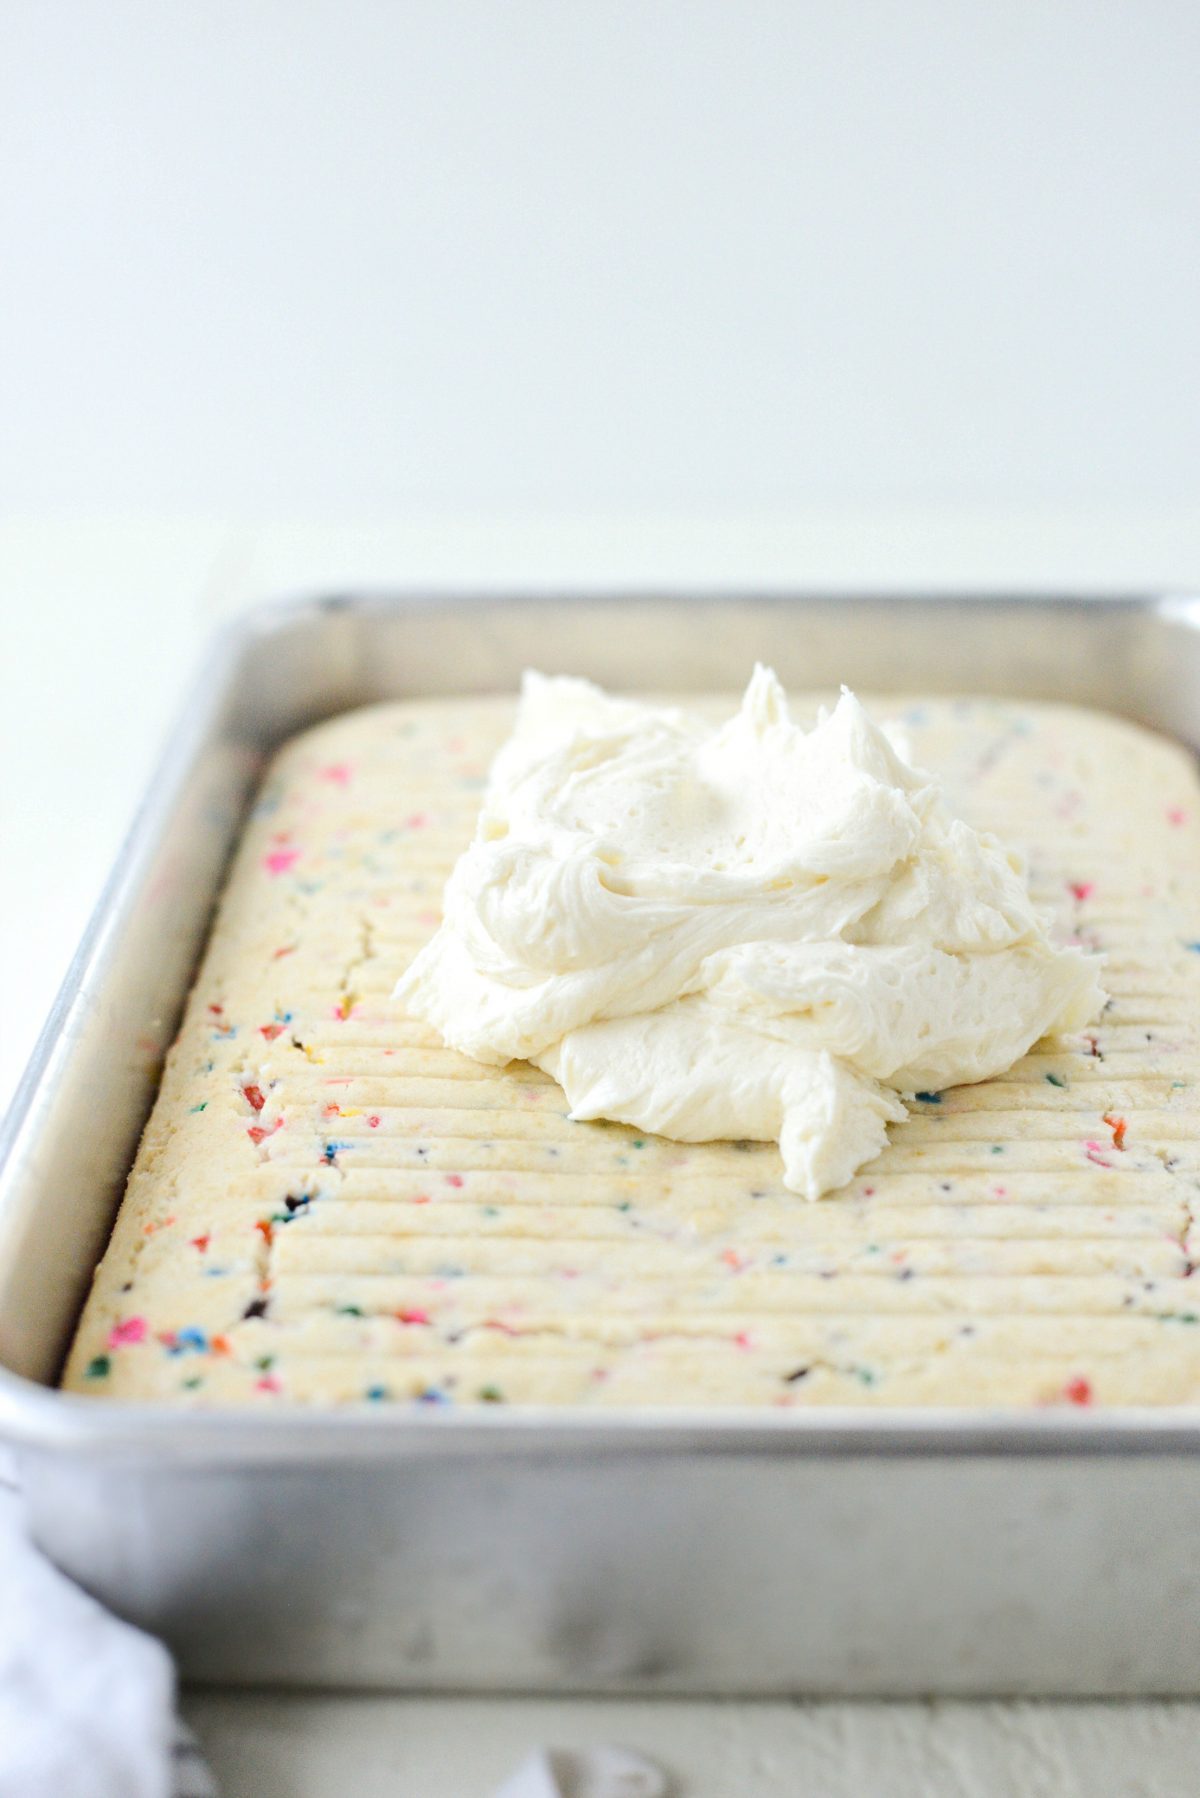 dollop of frosting on top of cake